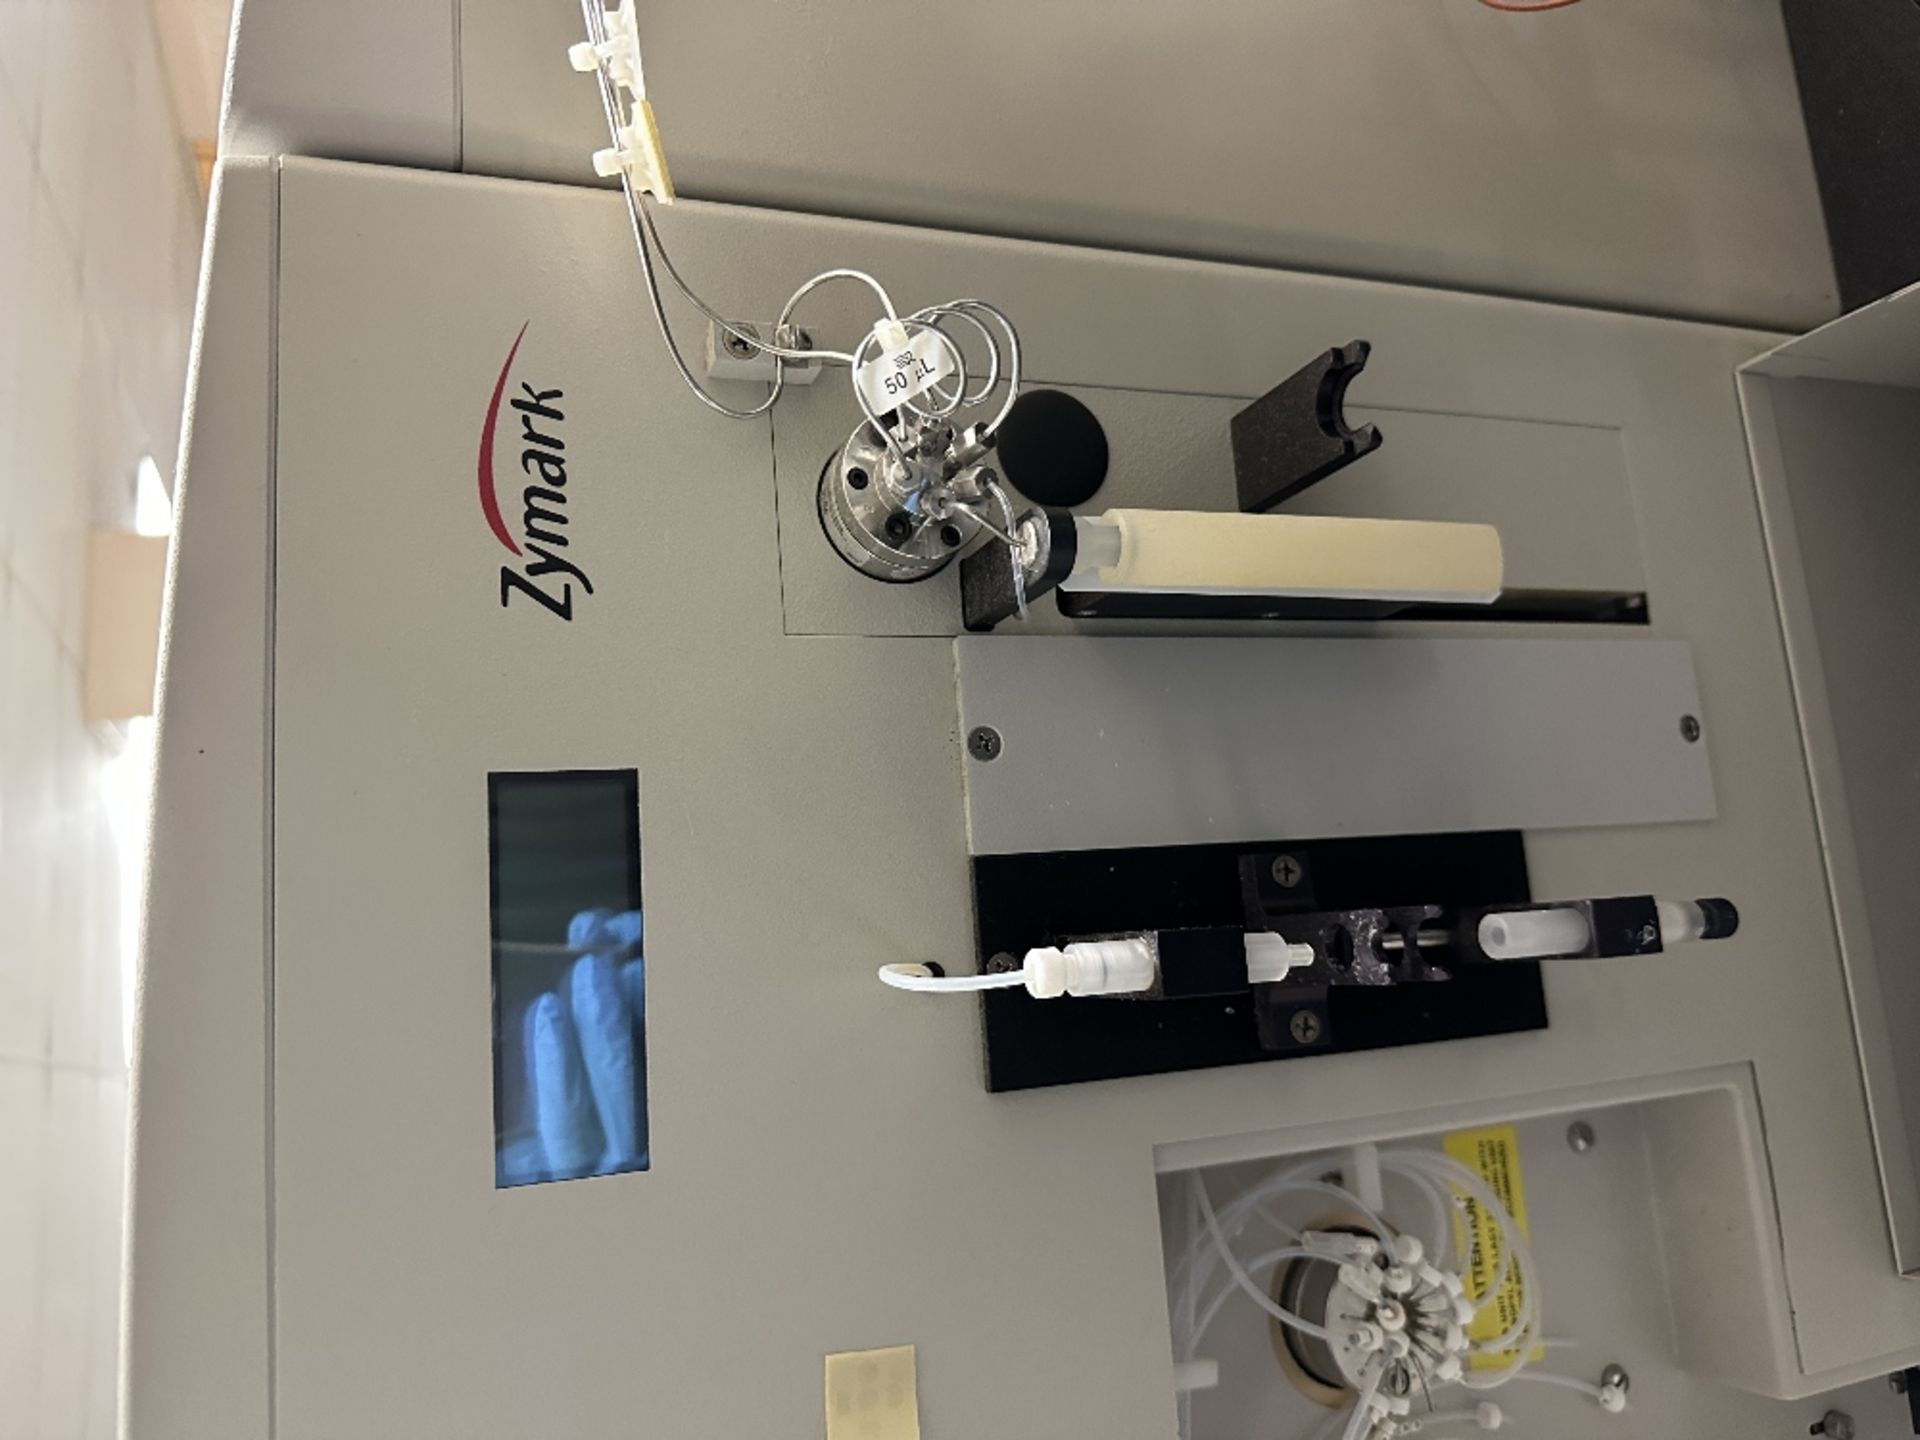 Zymark Prelude Sonication Workstation (LOCATED IN MIDDLETOWN, N.Y.)-FOR PACKAGING & SHIPPING - Image 7 of 8